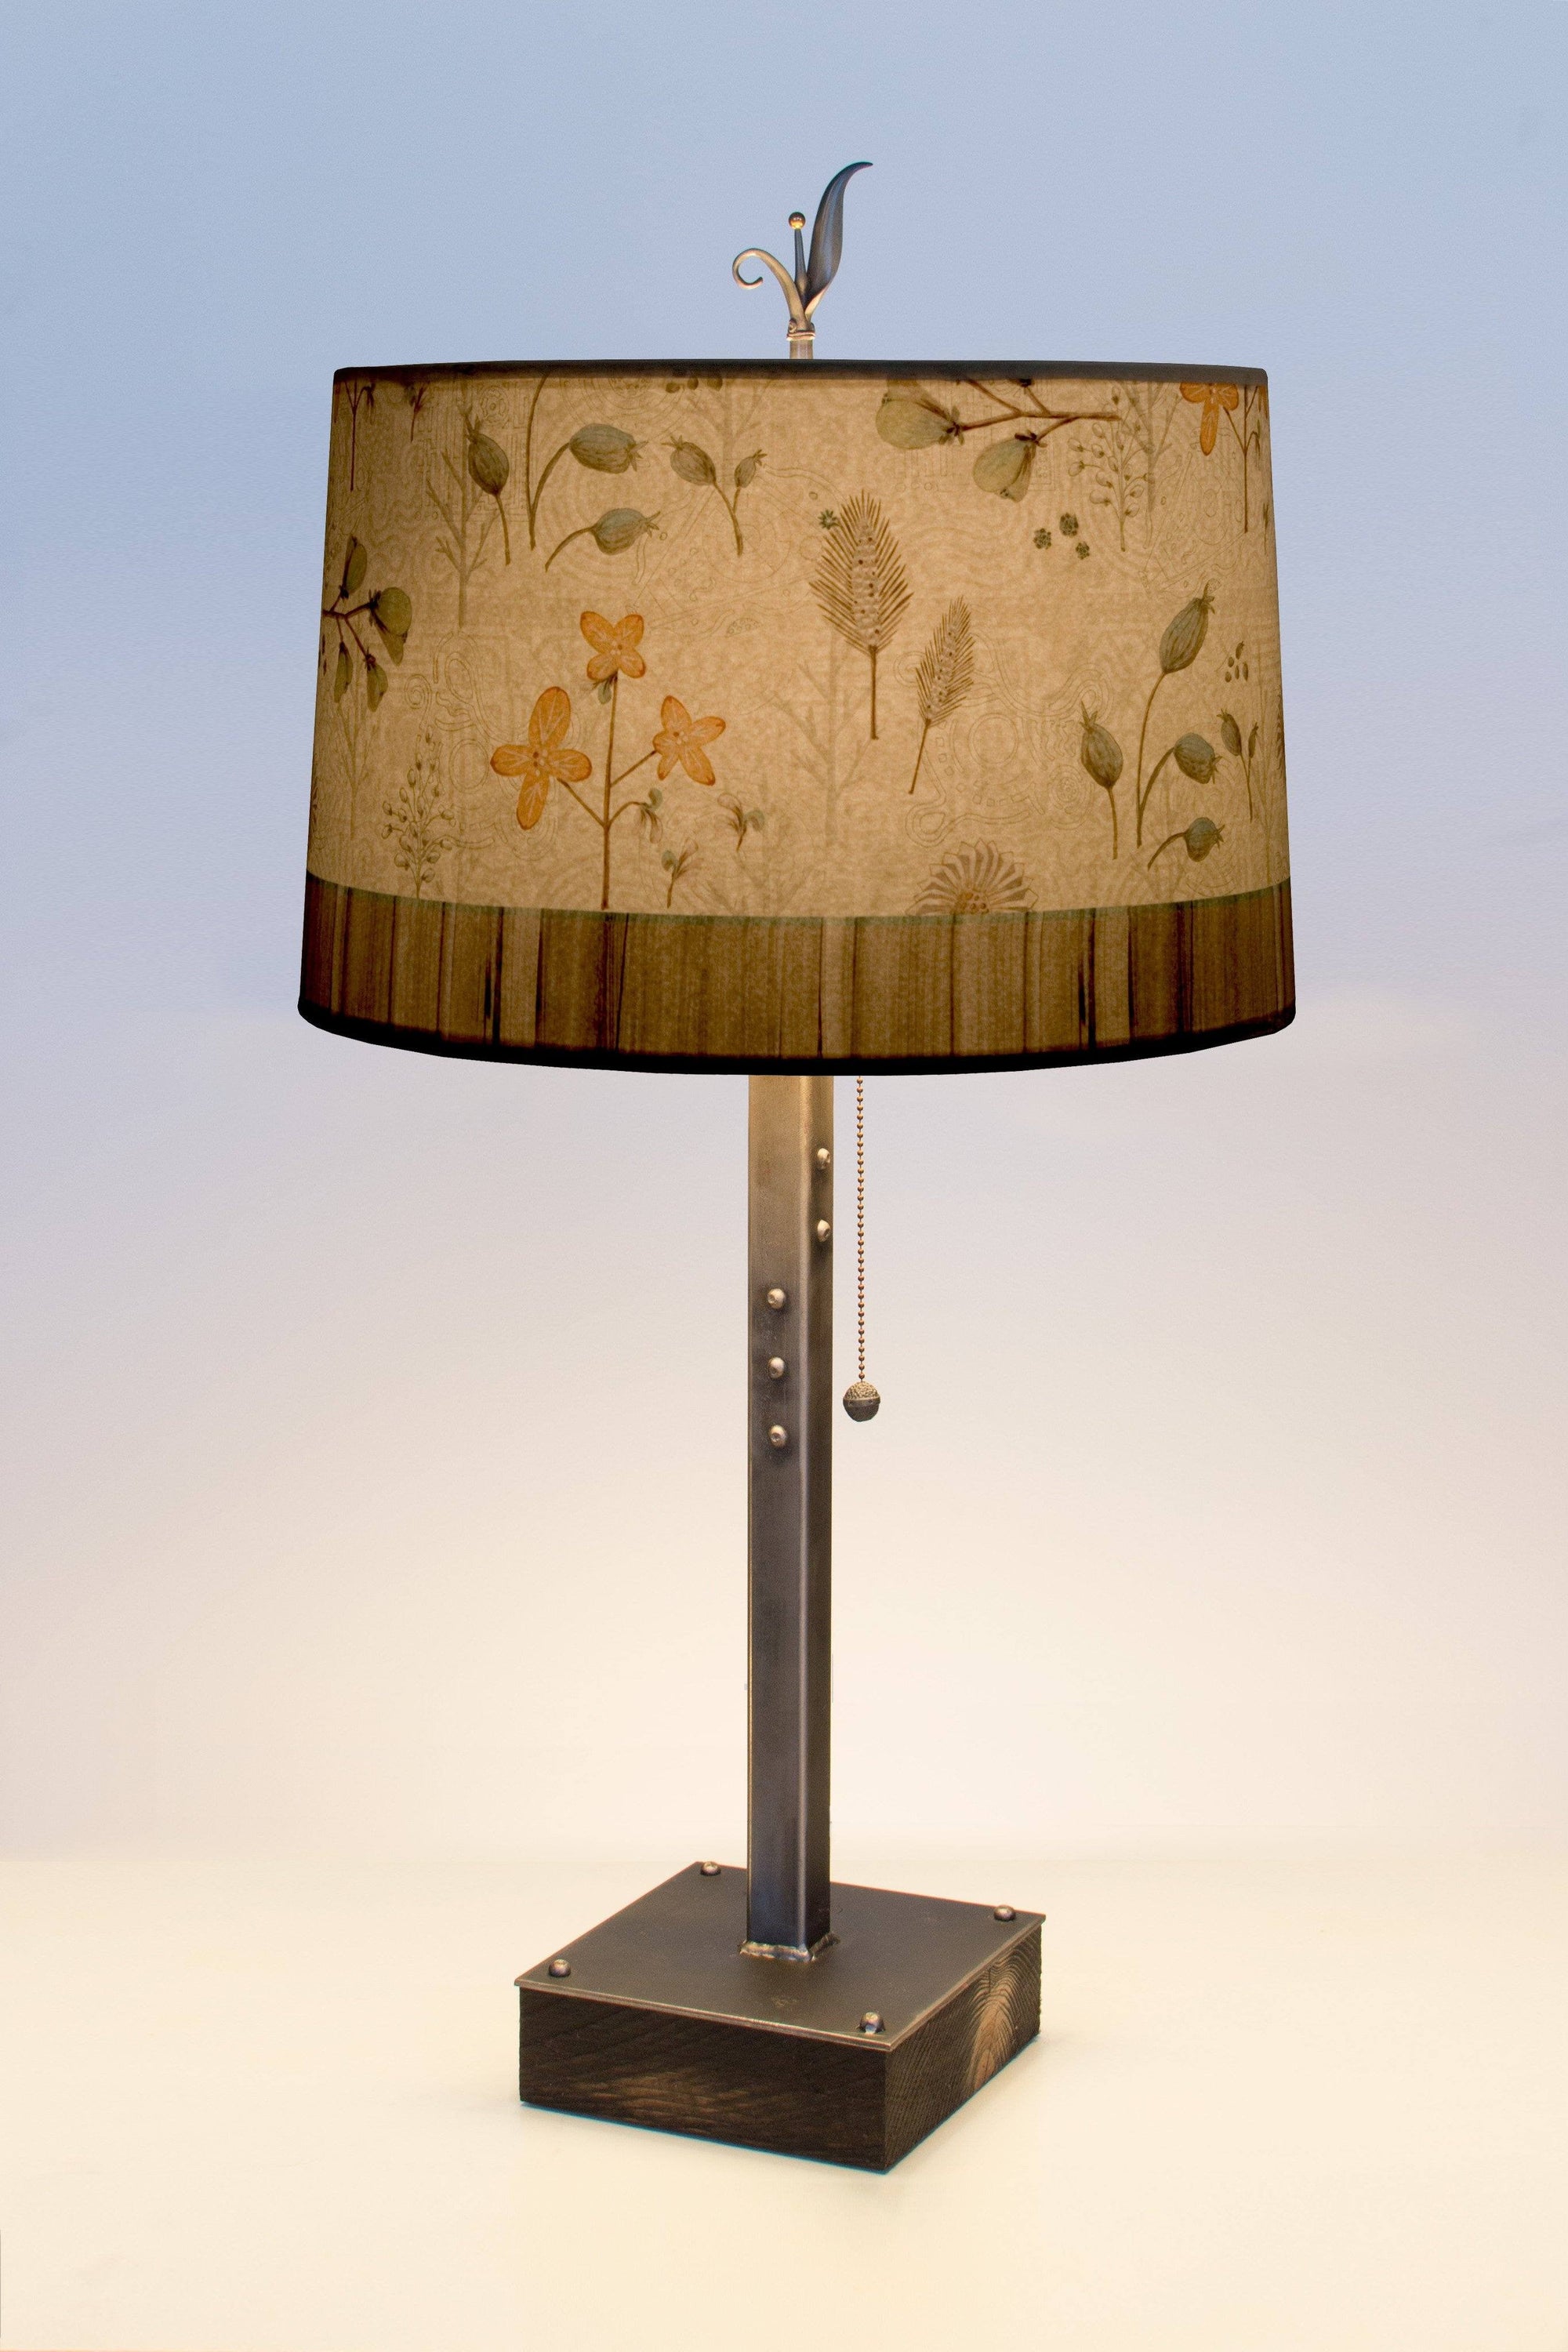 Steel Table Lamp on Wood with Large Drum Shade in Flora and Maze